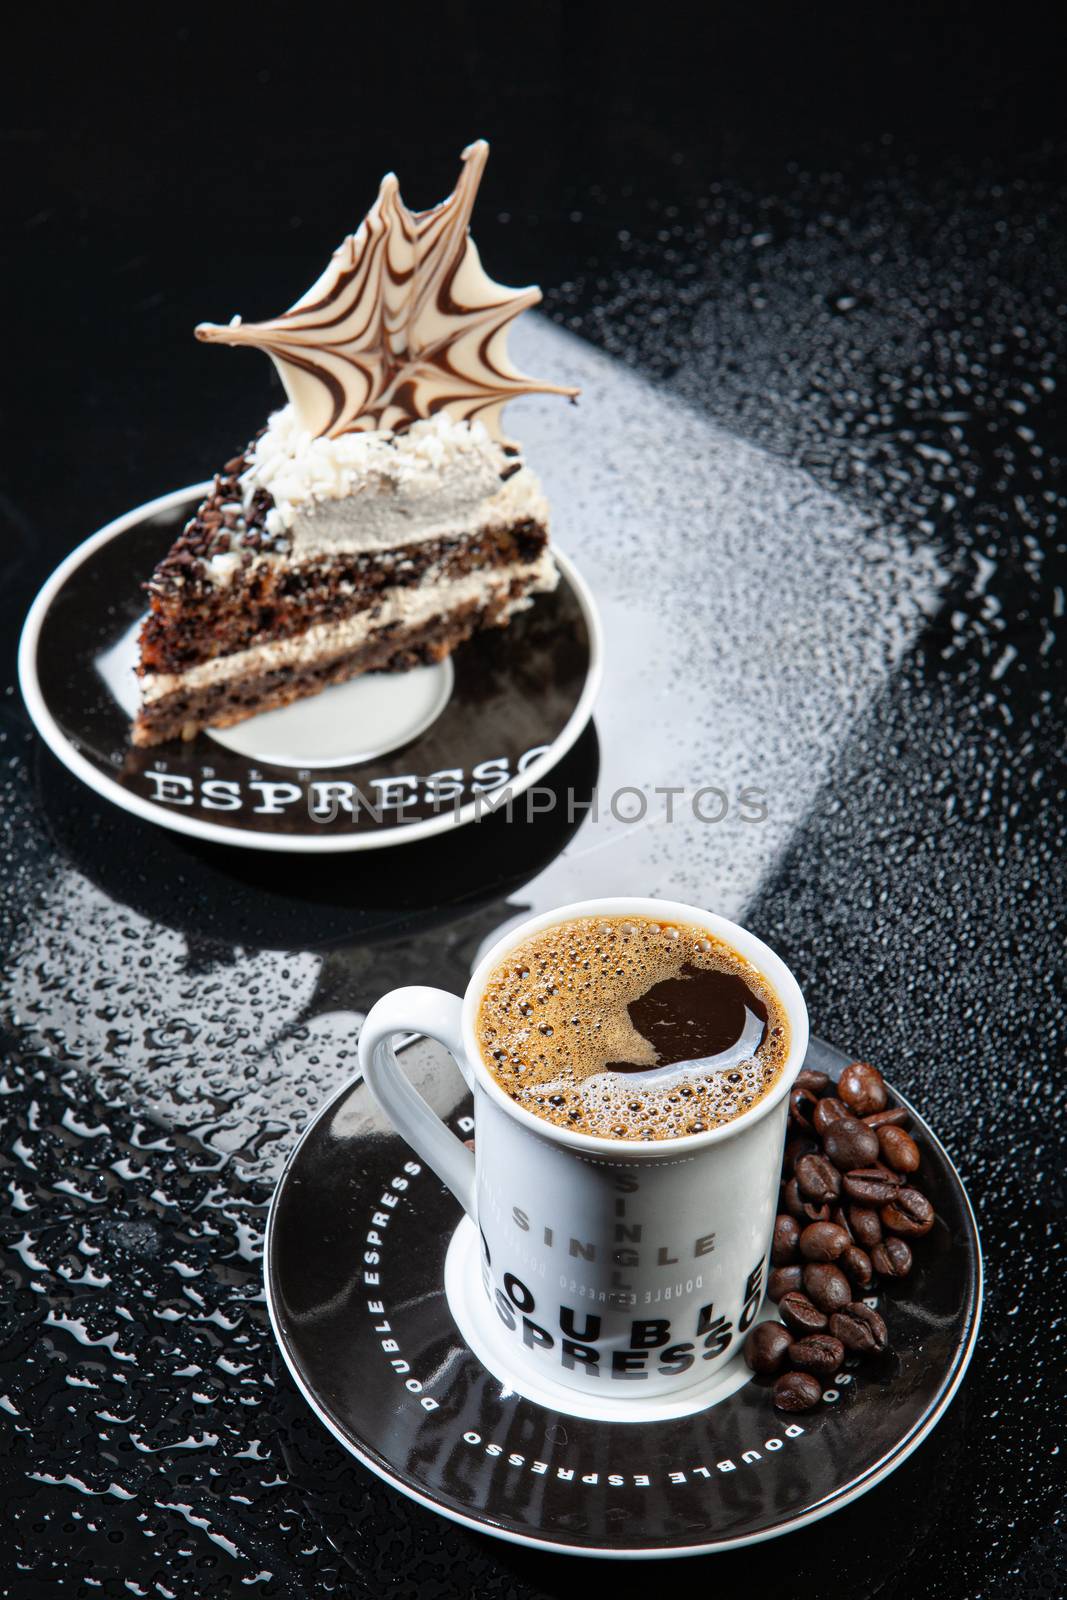 Cup of coffee and chocolate cake on a glass background